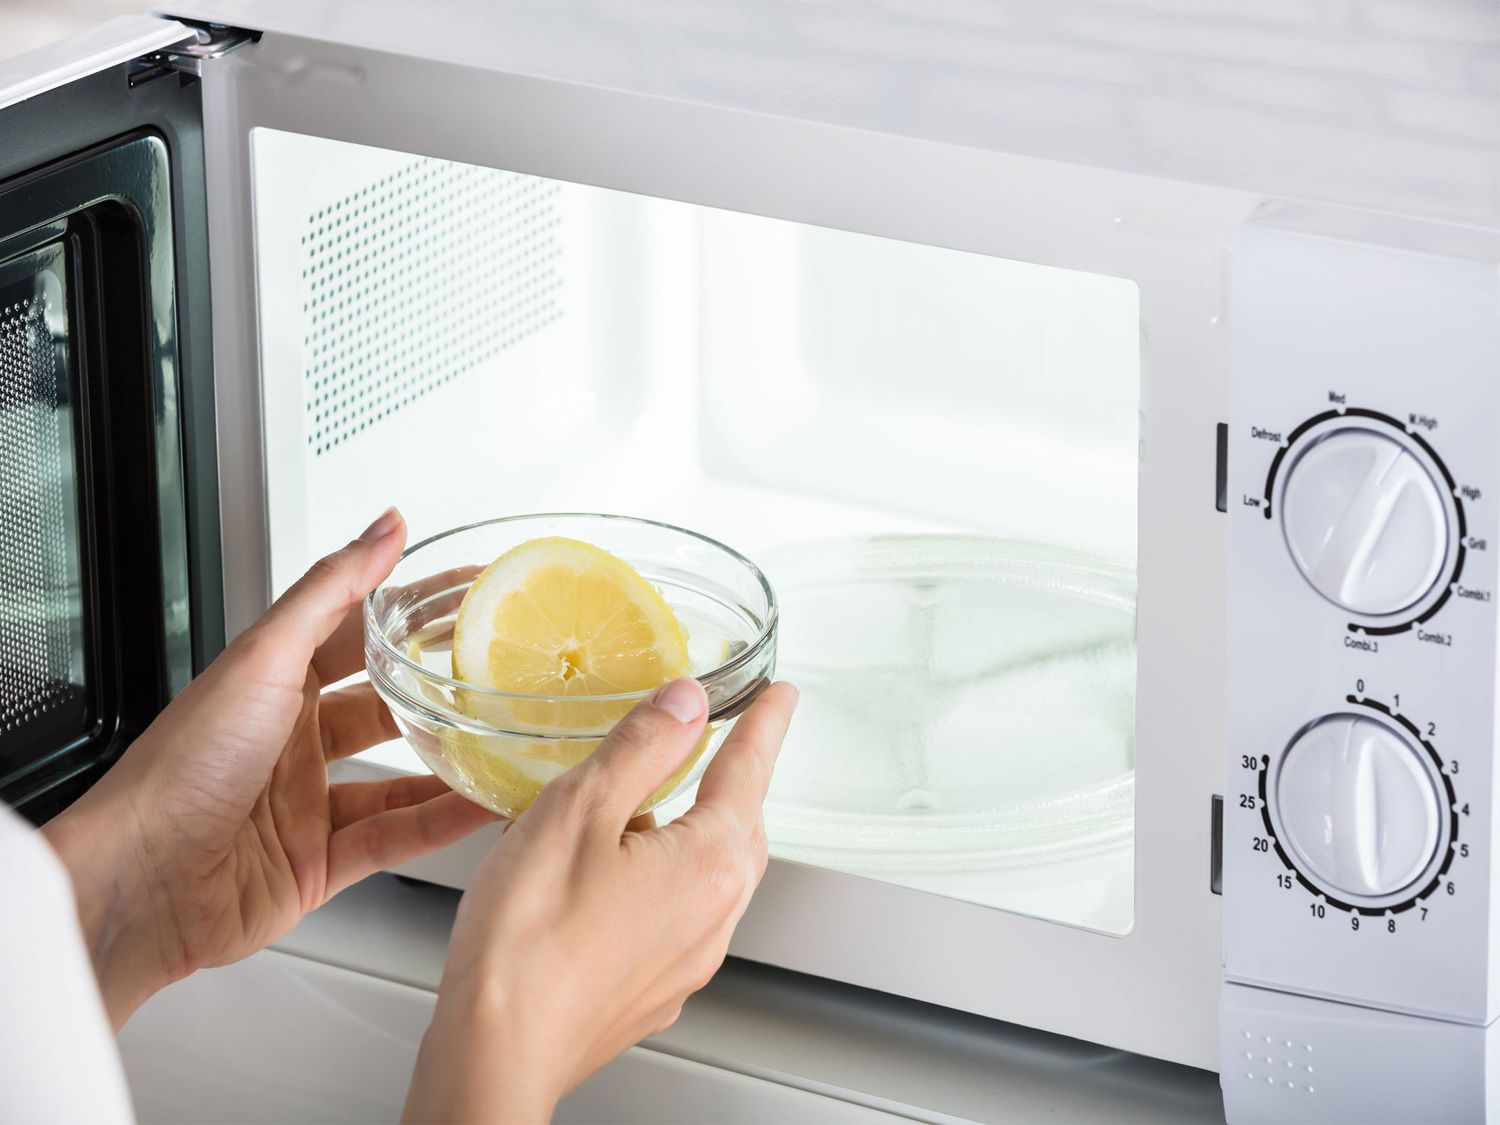 Lemon cleaning solution in microwave